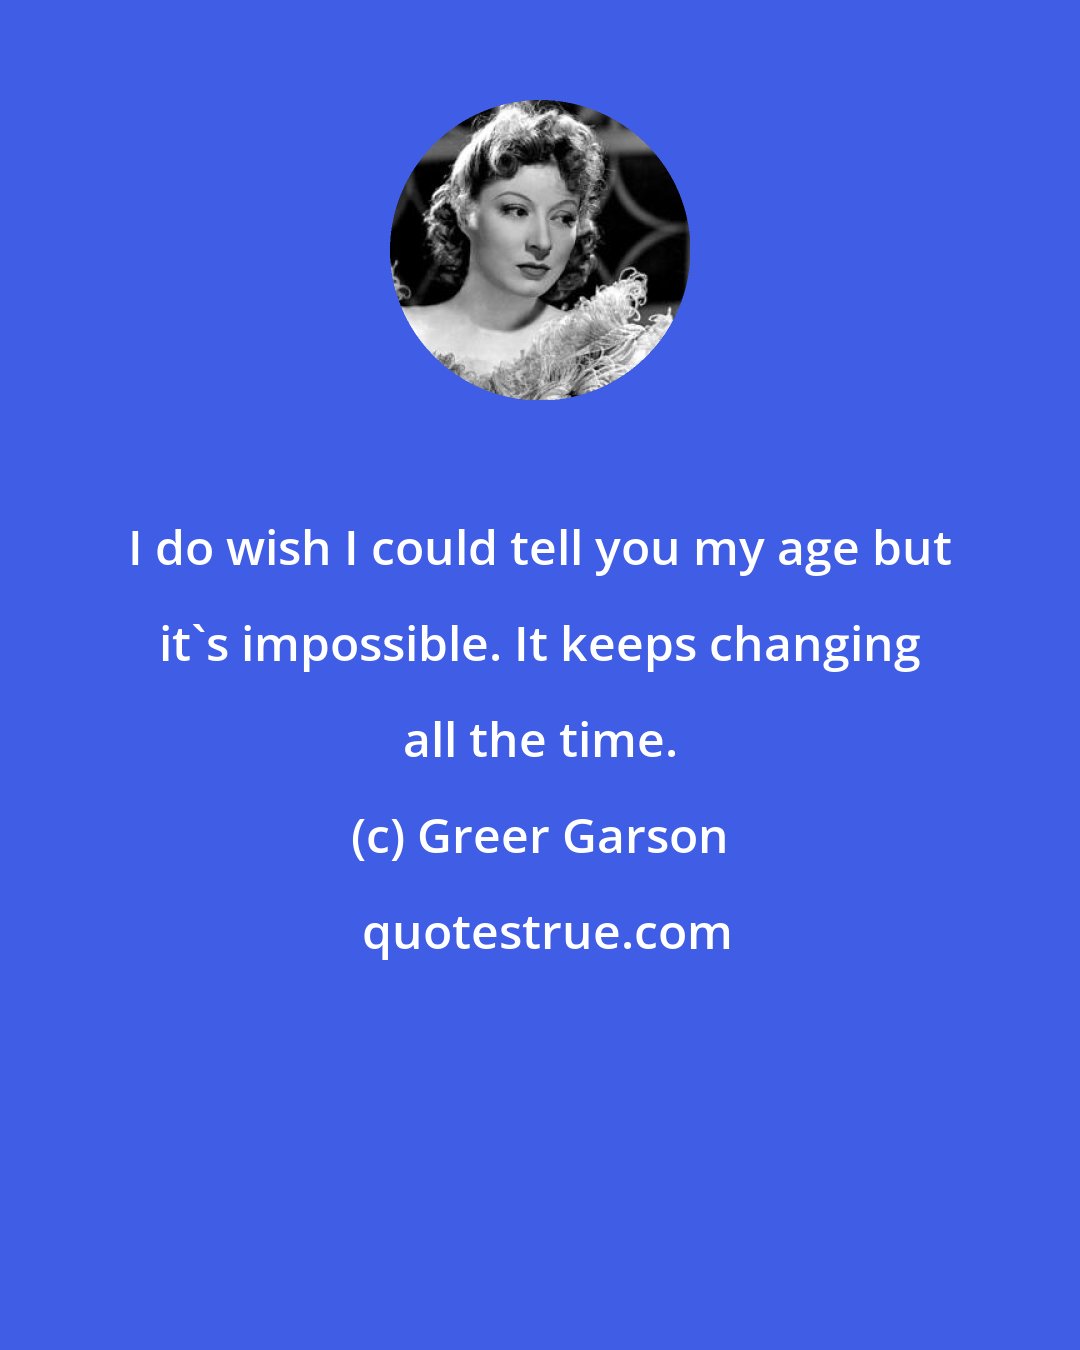 Greer Garson: I do wish I could tell you my age but it's impossible. It keeps changing all the time.